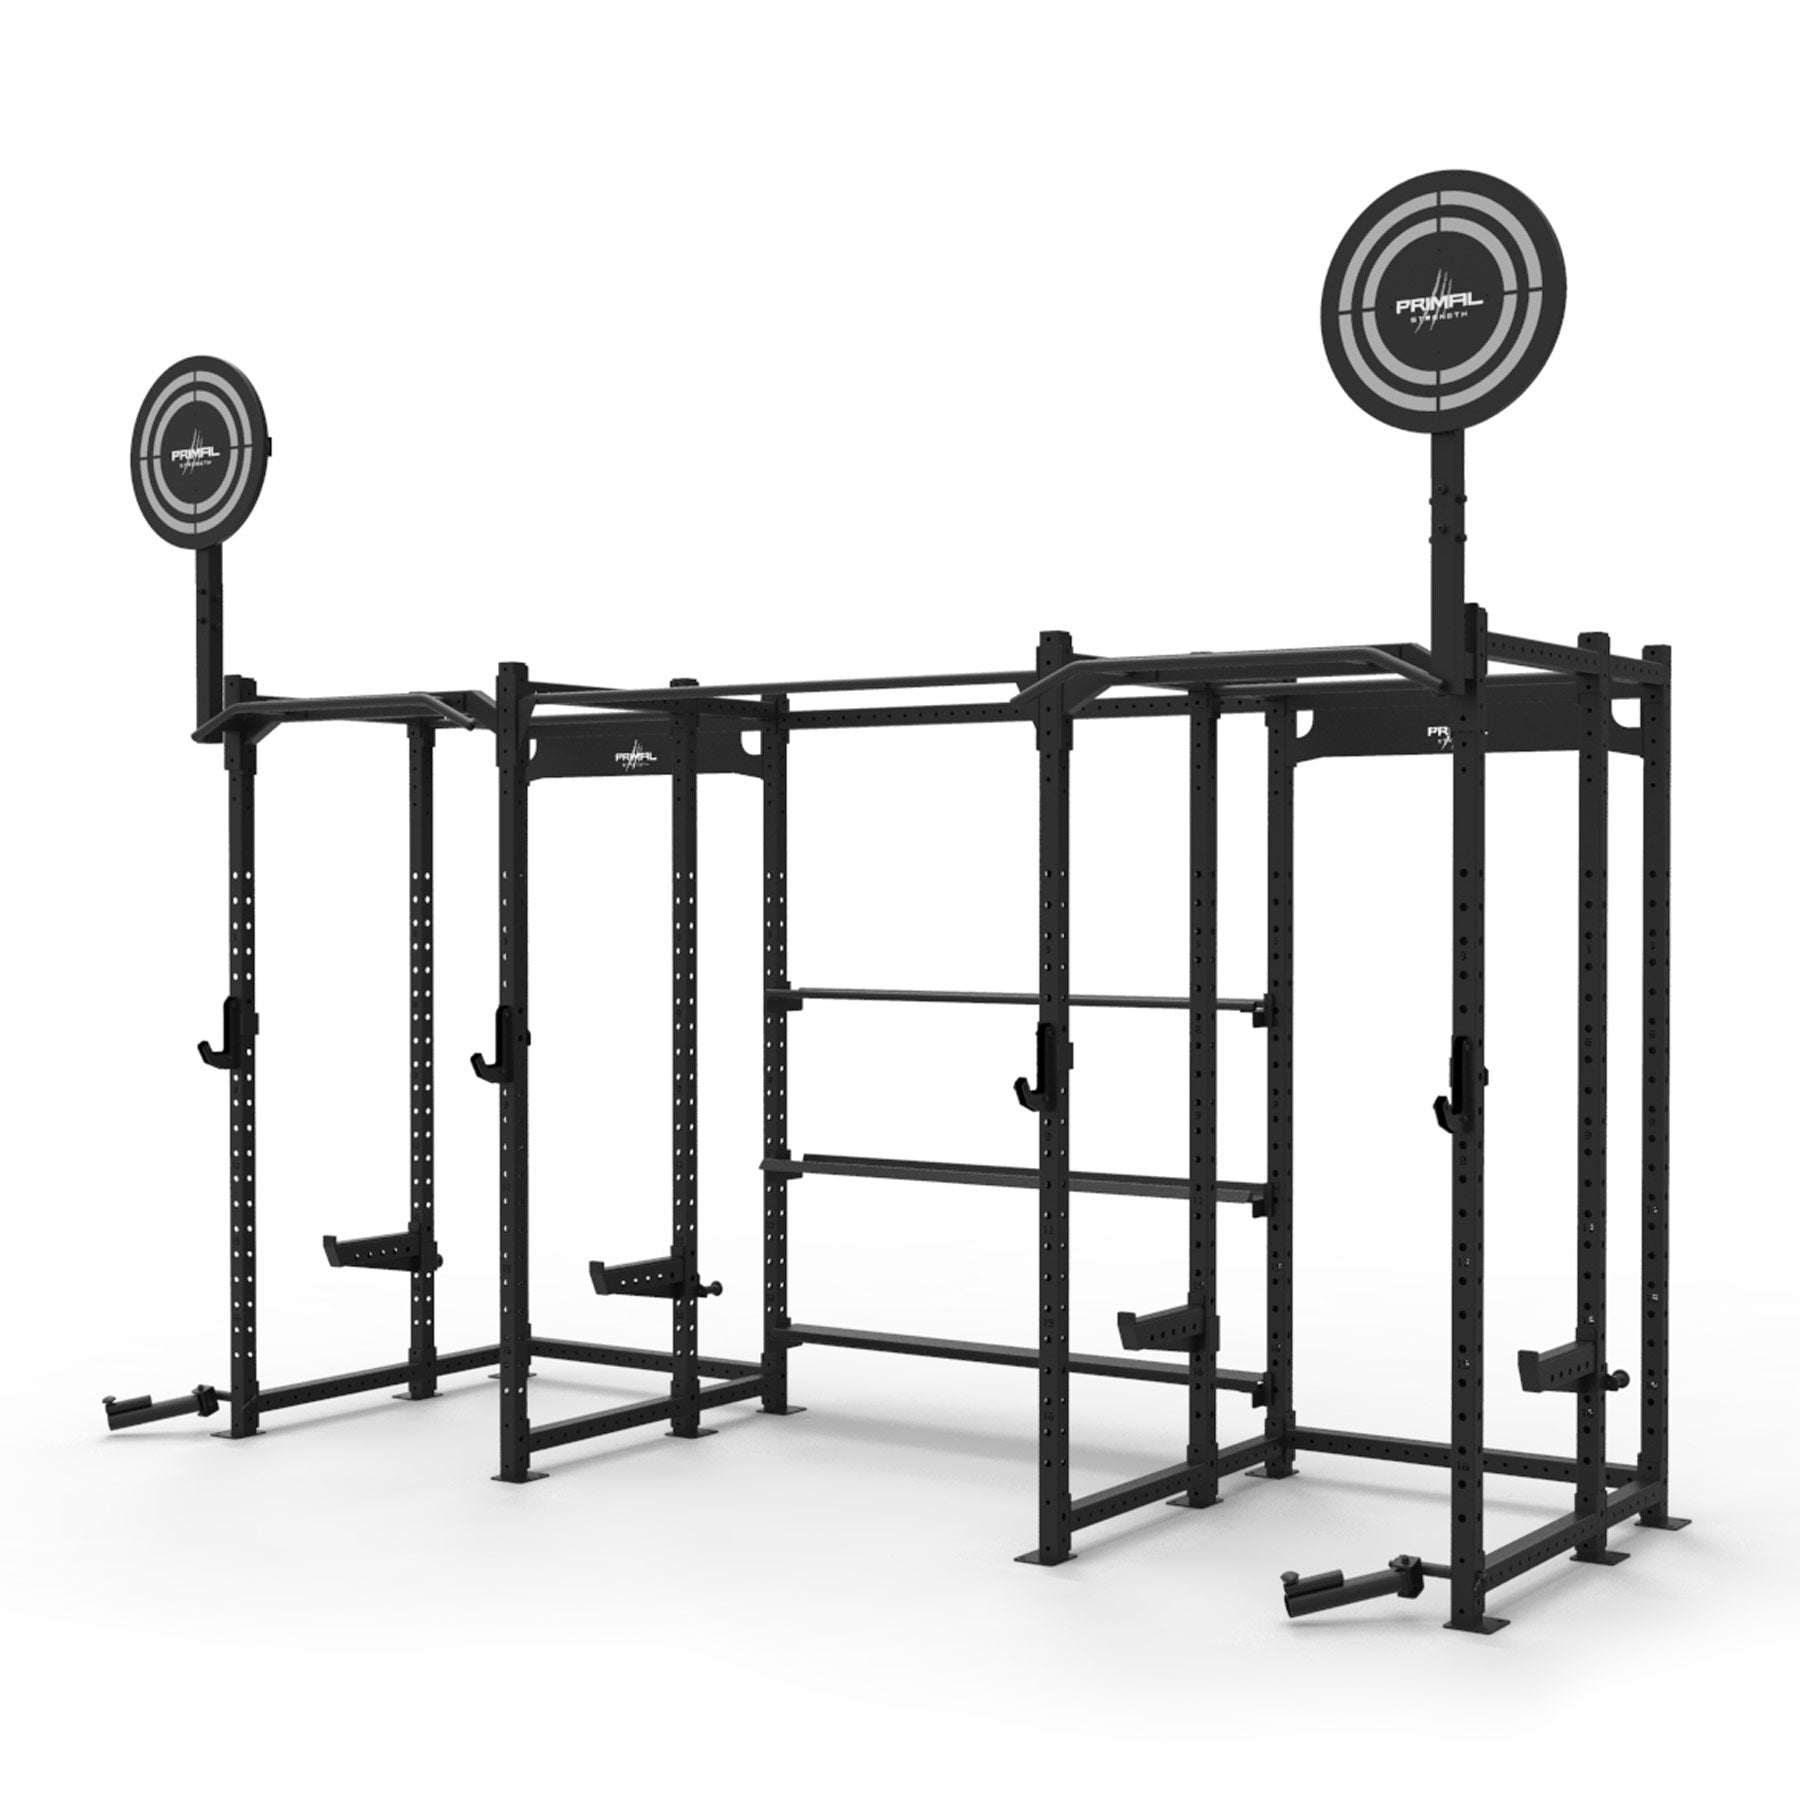 two group gym racks featuring storage and accessories for functional equipment